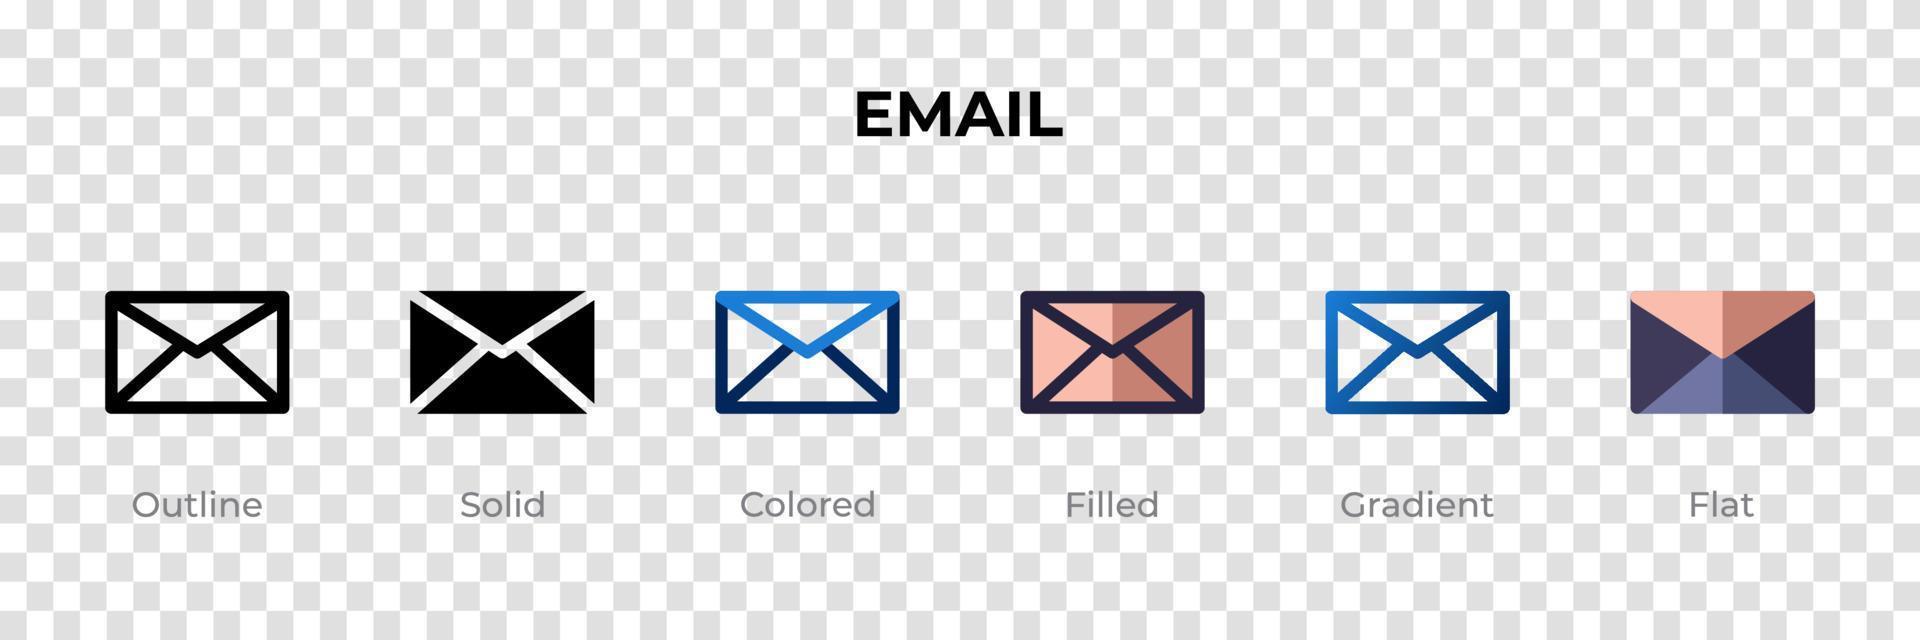 Email icon in different style. Email vector icons designed in outline, solid, colored, filled, gradient, and flat style. Symbol, logo illustration. Vector illustration